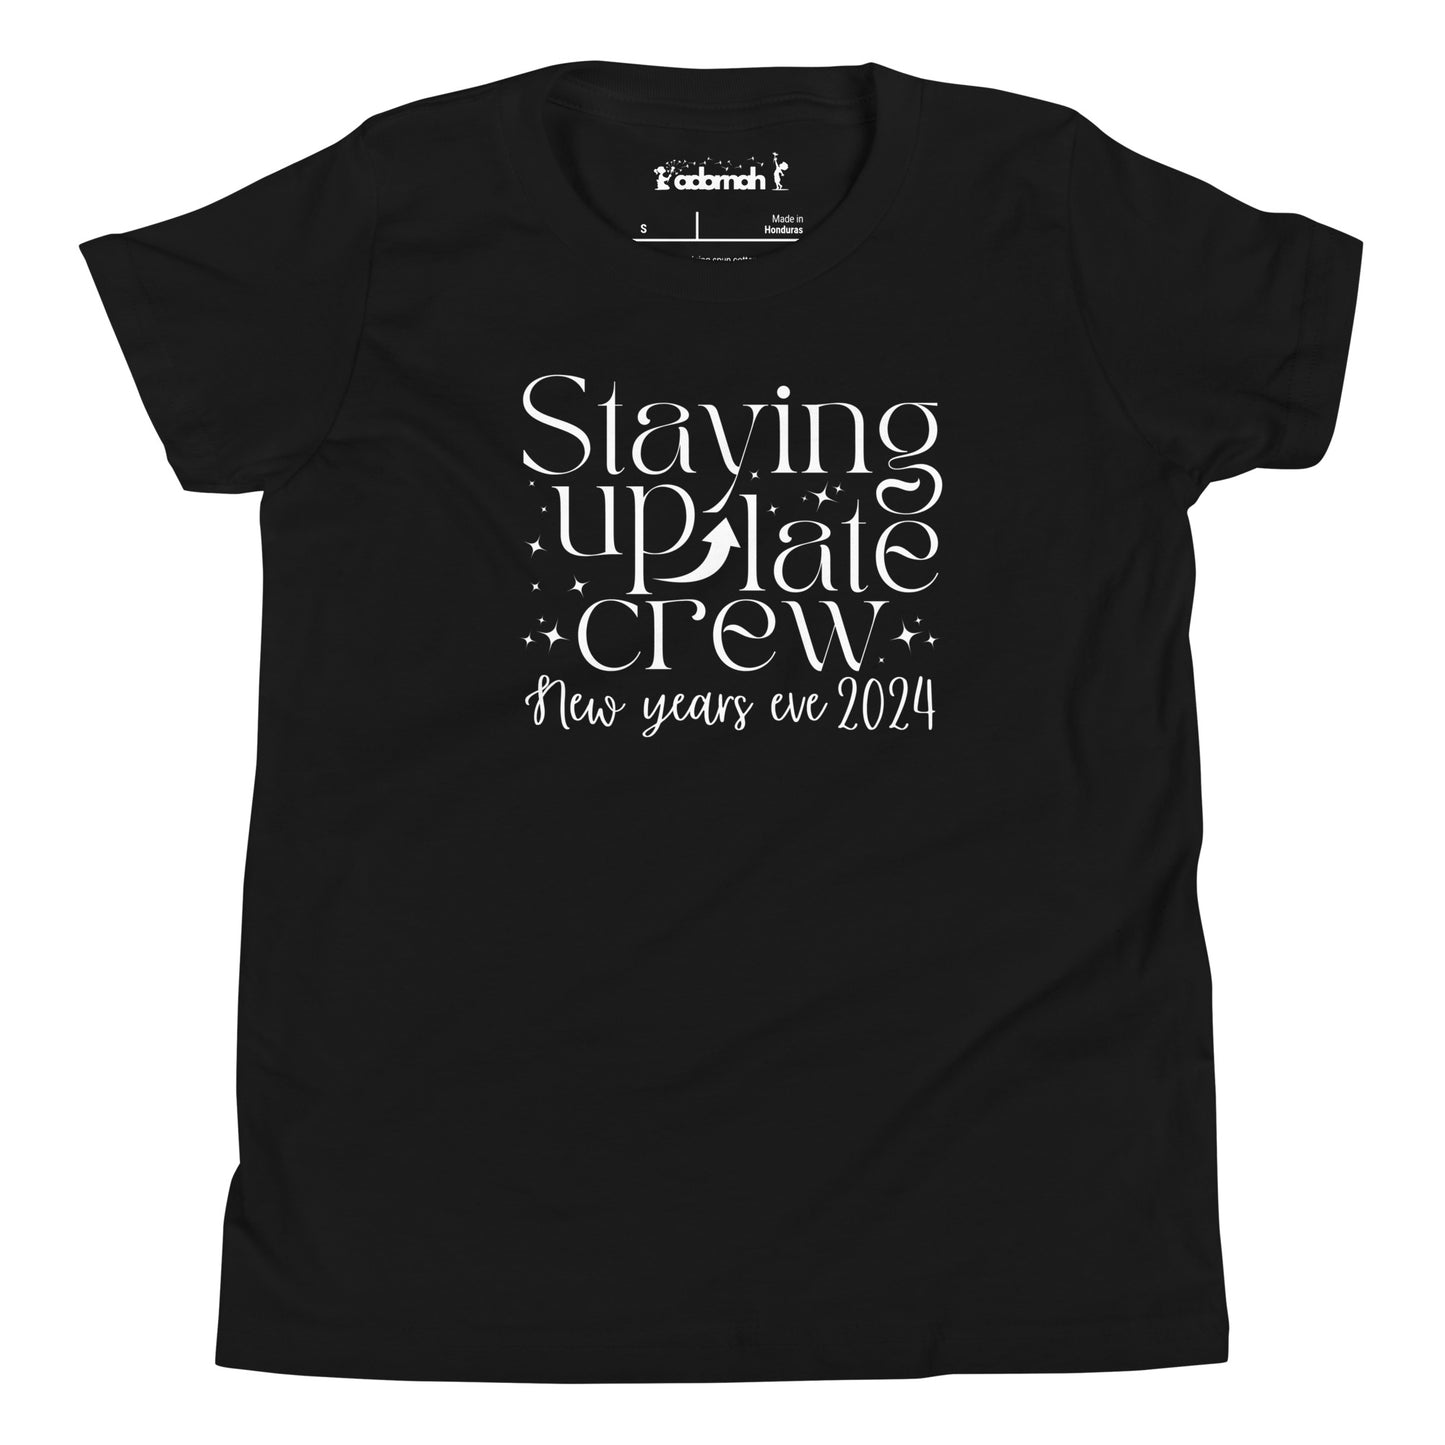 Staying up late crew Youth New Year T-shirt